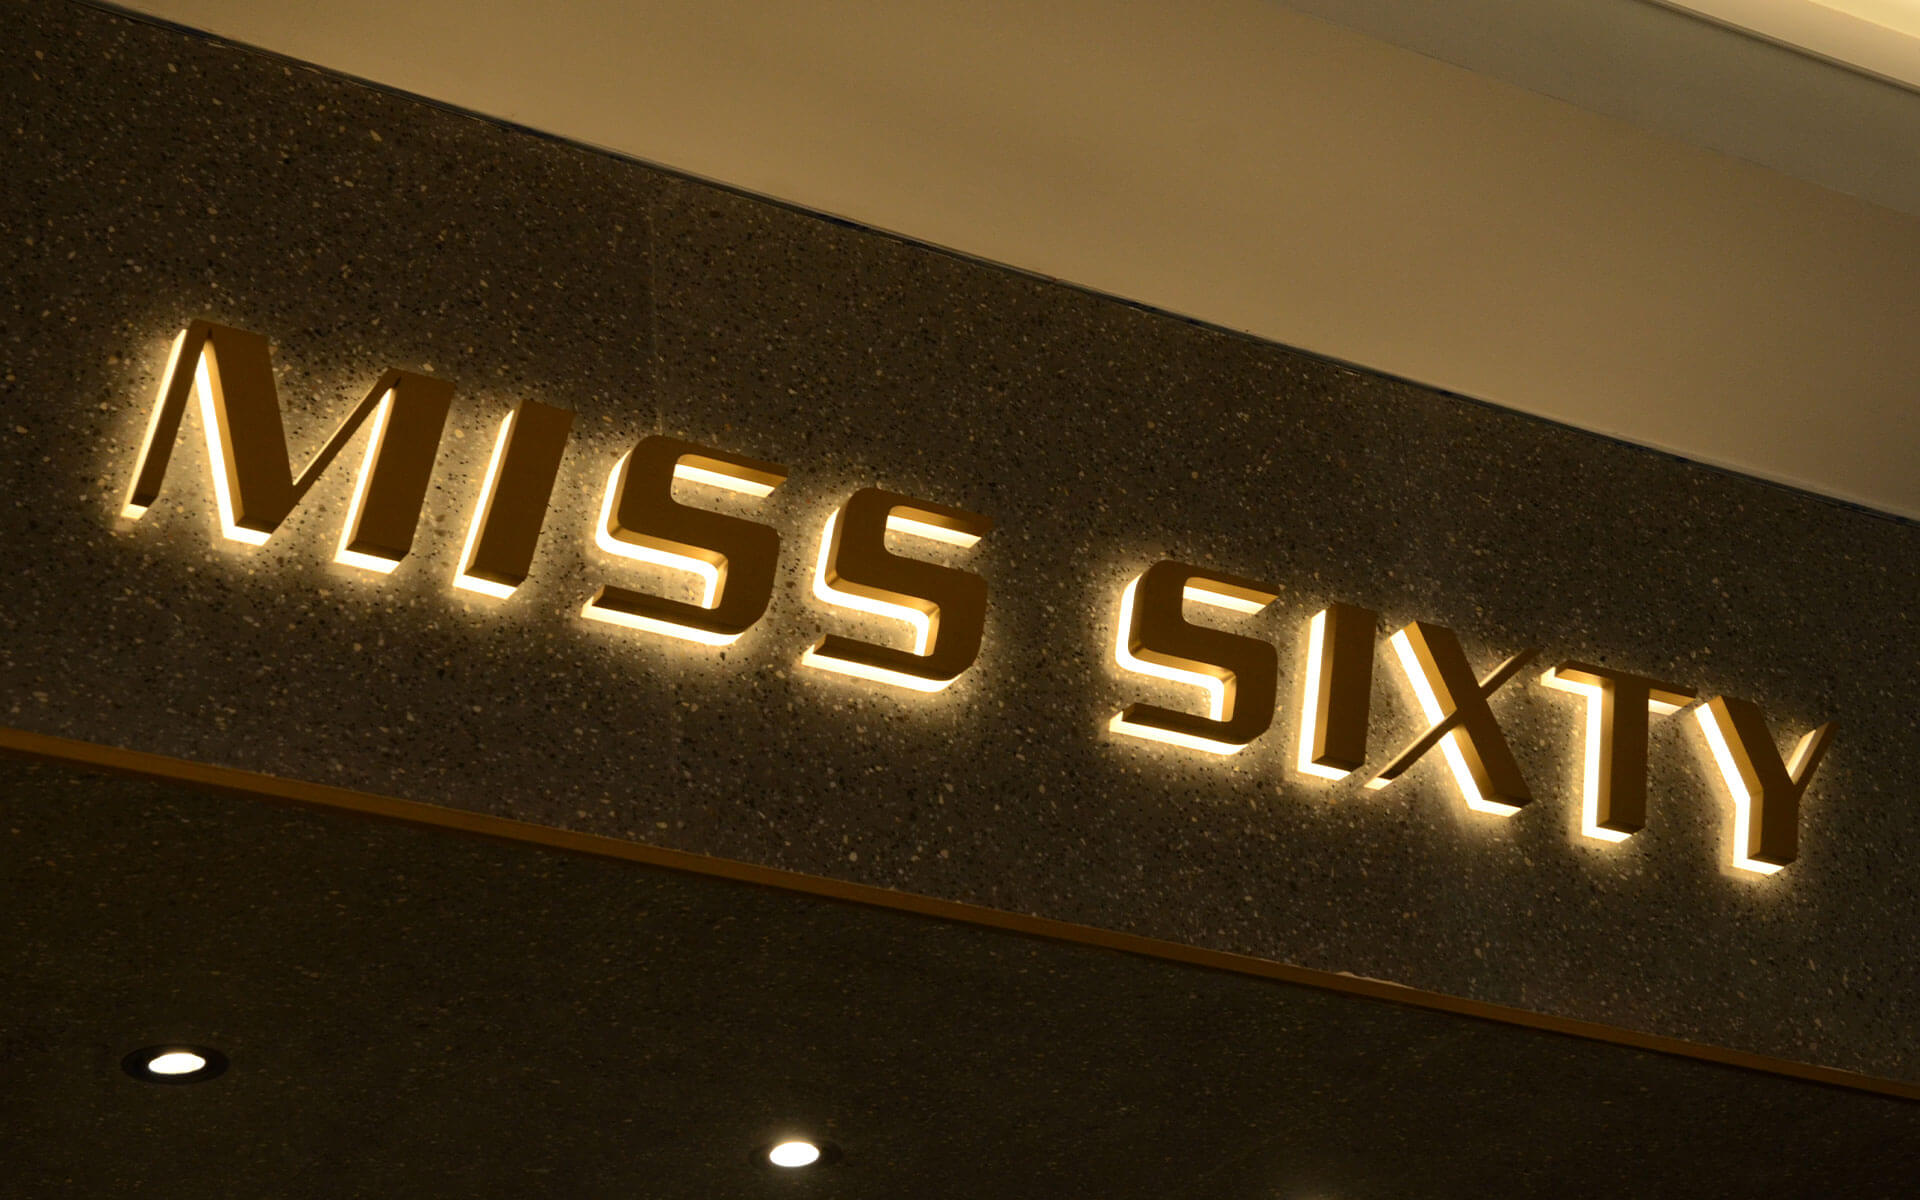 Pro Back-lit Metal Channel Letters for Miss Sixty